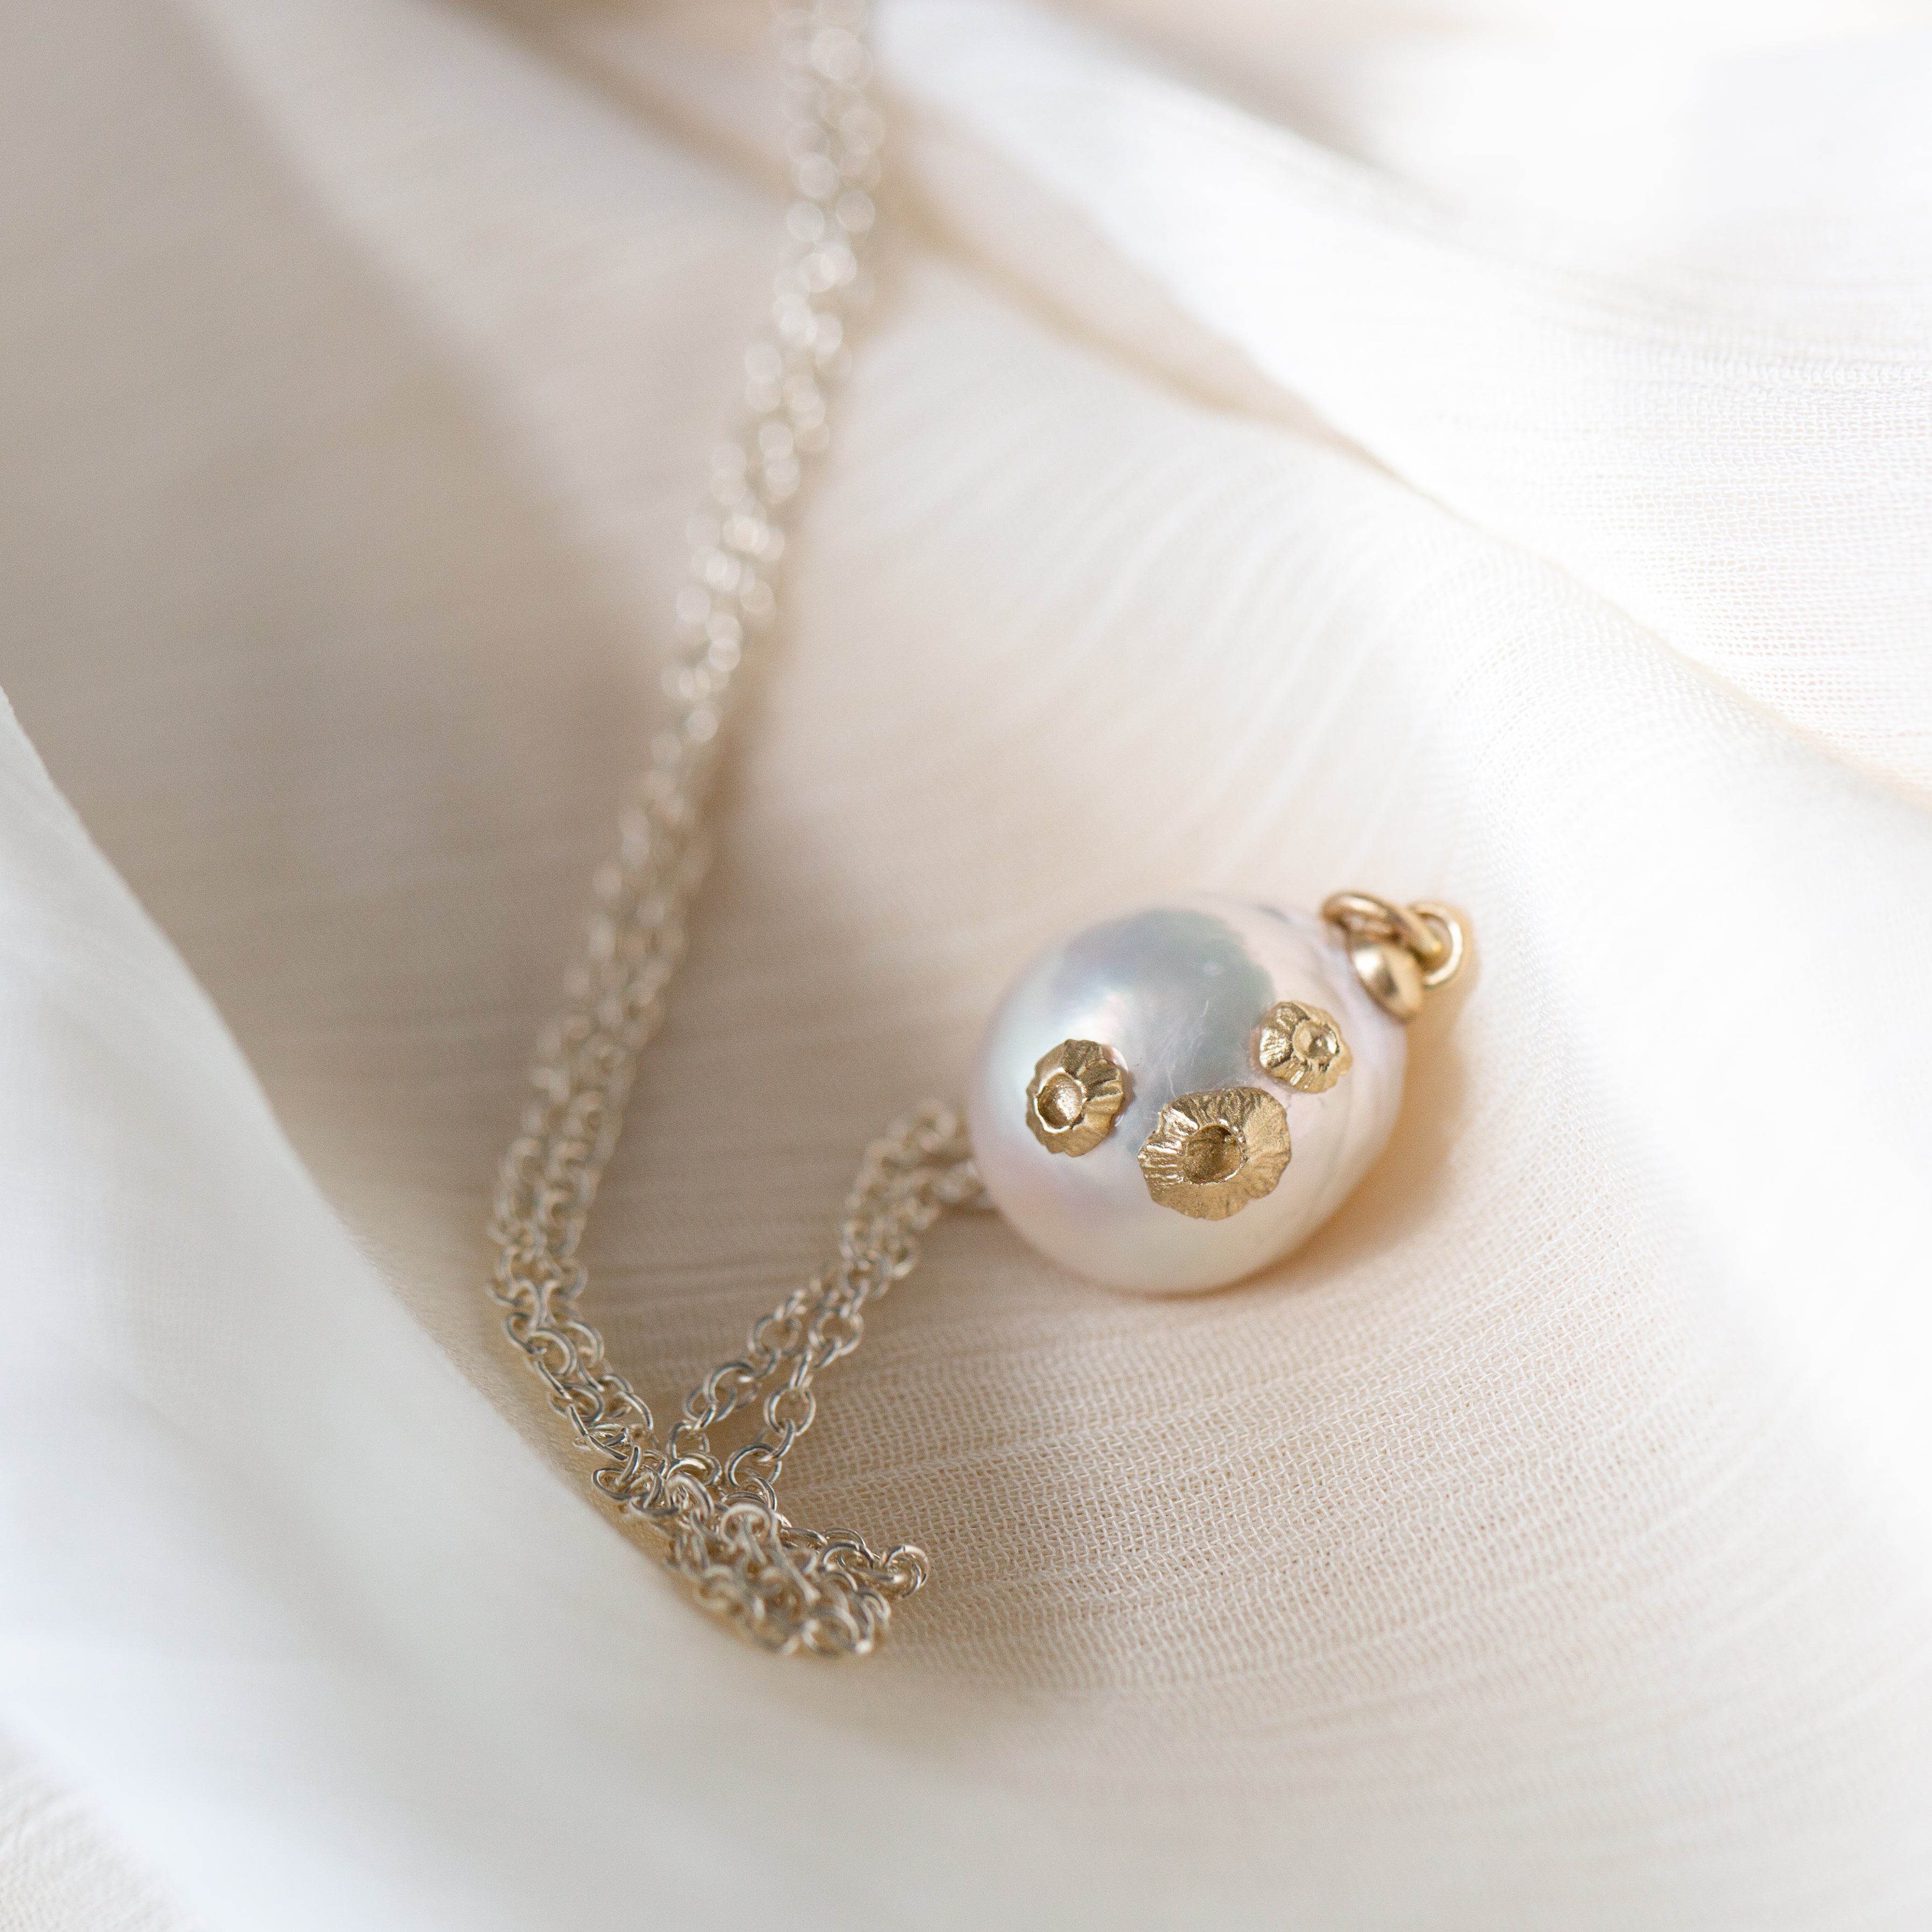 Handcrafted Baroque Pearl Ruthie B. Necklace with Barnacles